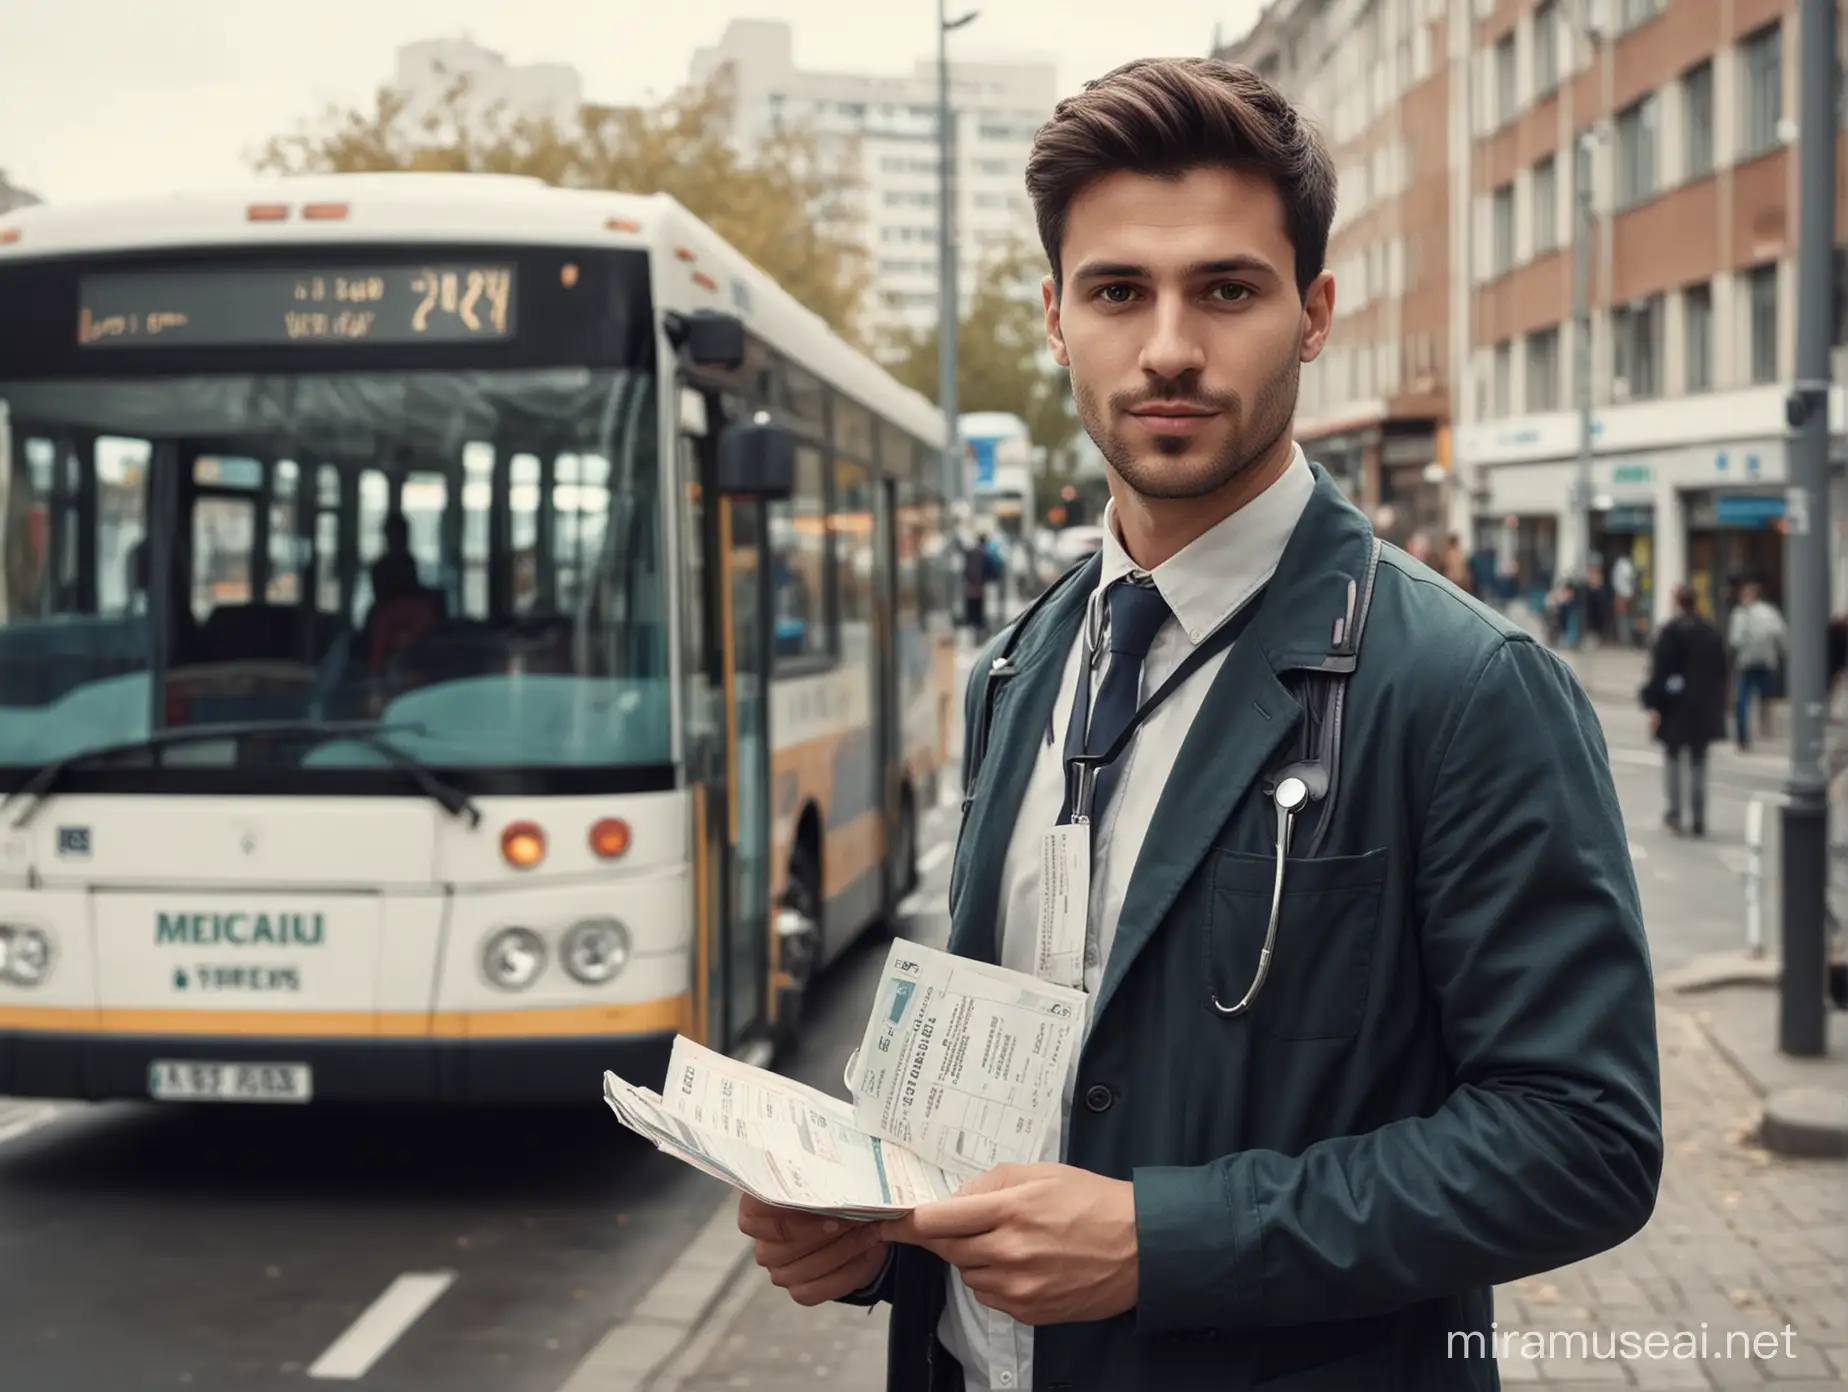 realistic photo, cinematic look, 28 years old medical student standing is a autobus stop with an stethoscope in one hand and a bus ticket in the other, the man is looking at the camera, wide shot that we can see the all autobus stop from the front and the student is up right  in the middle of the bus stop